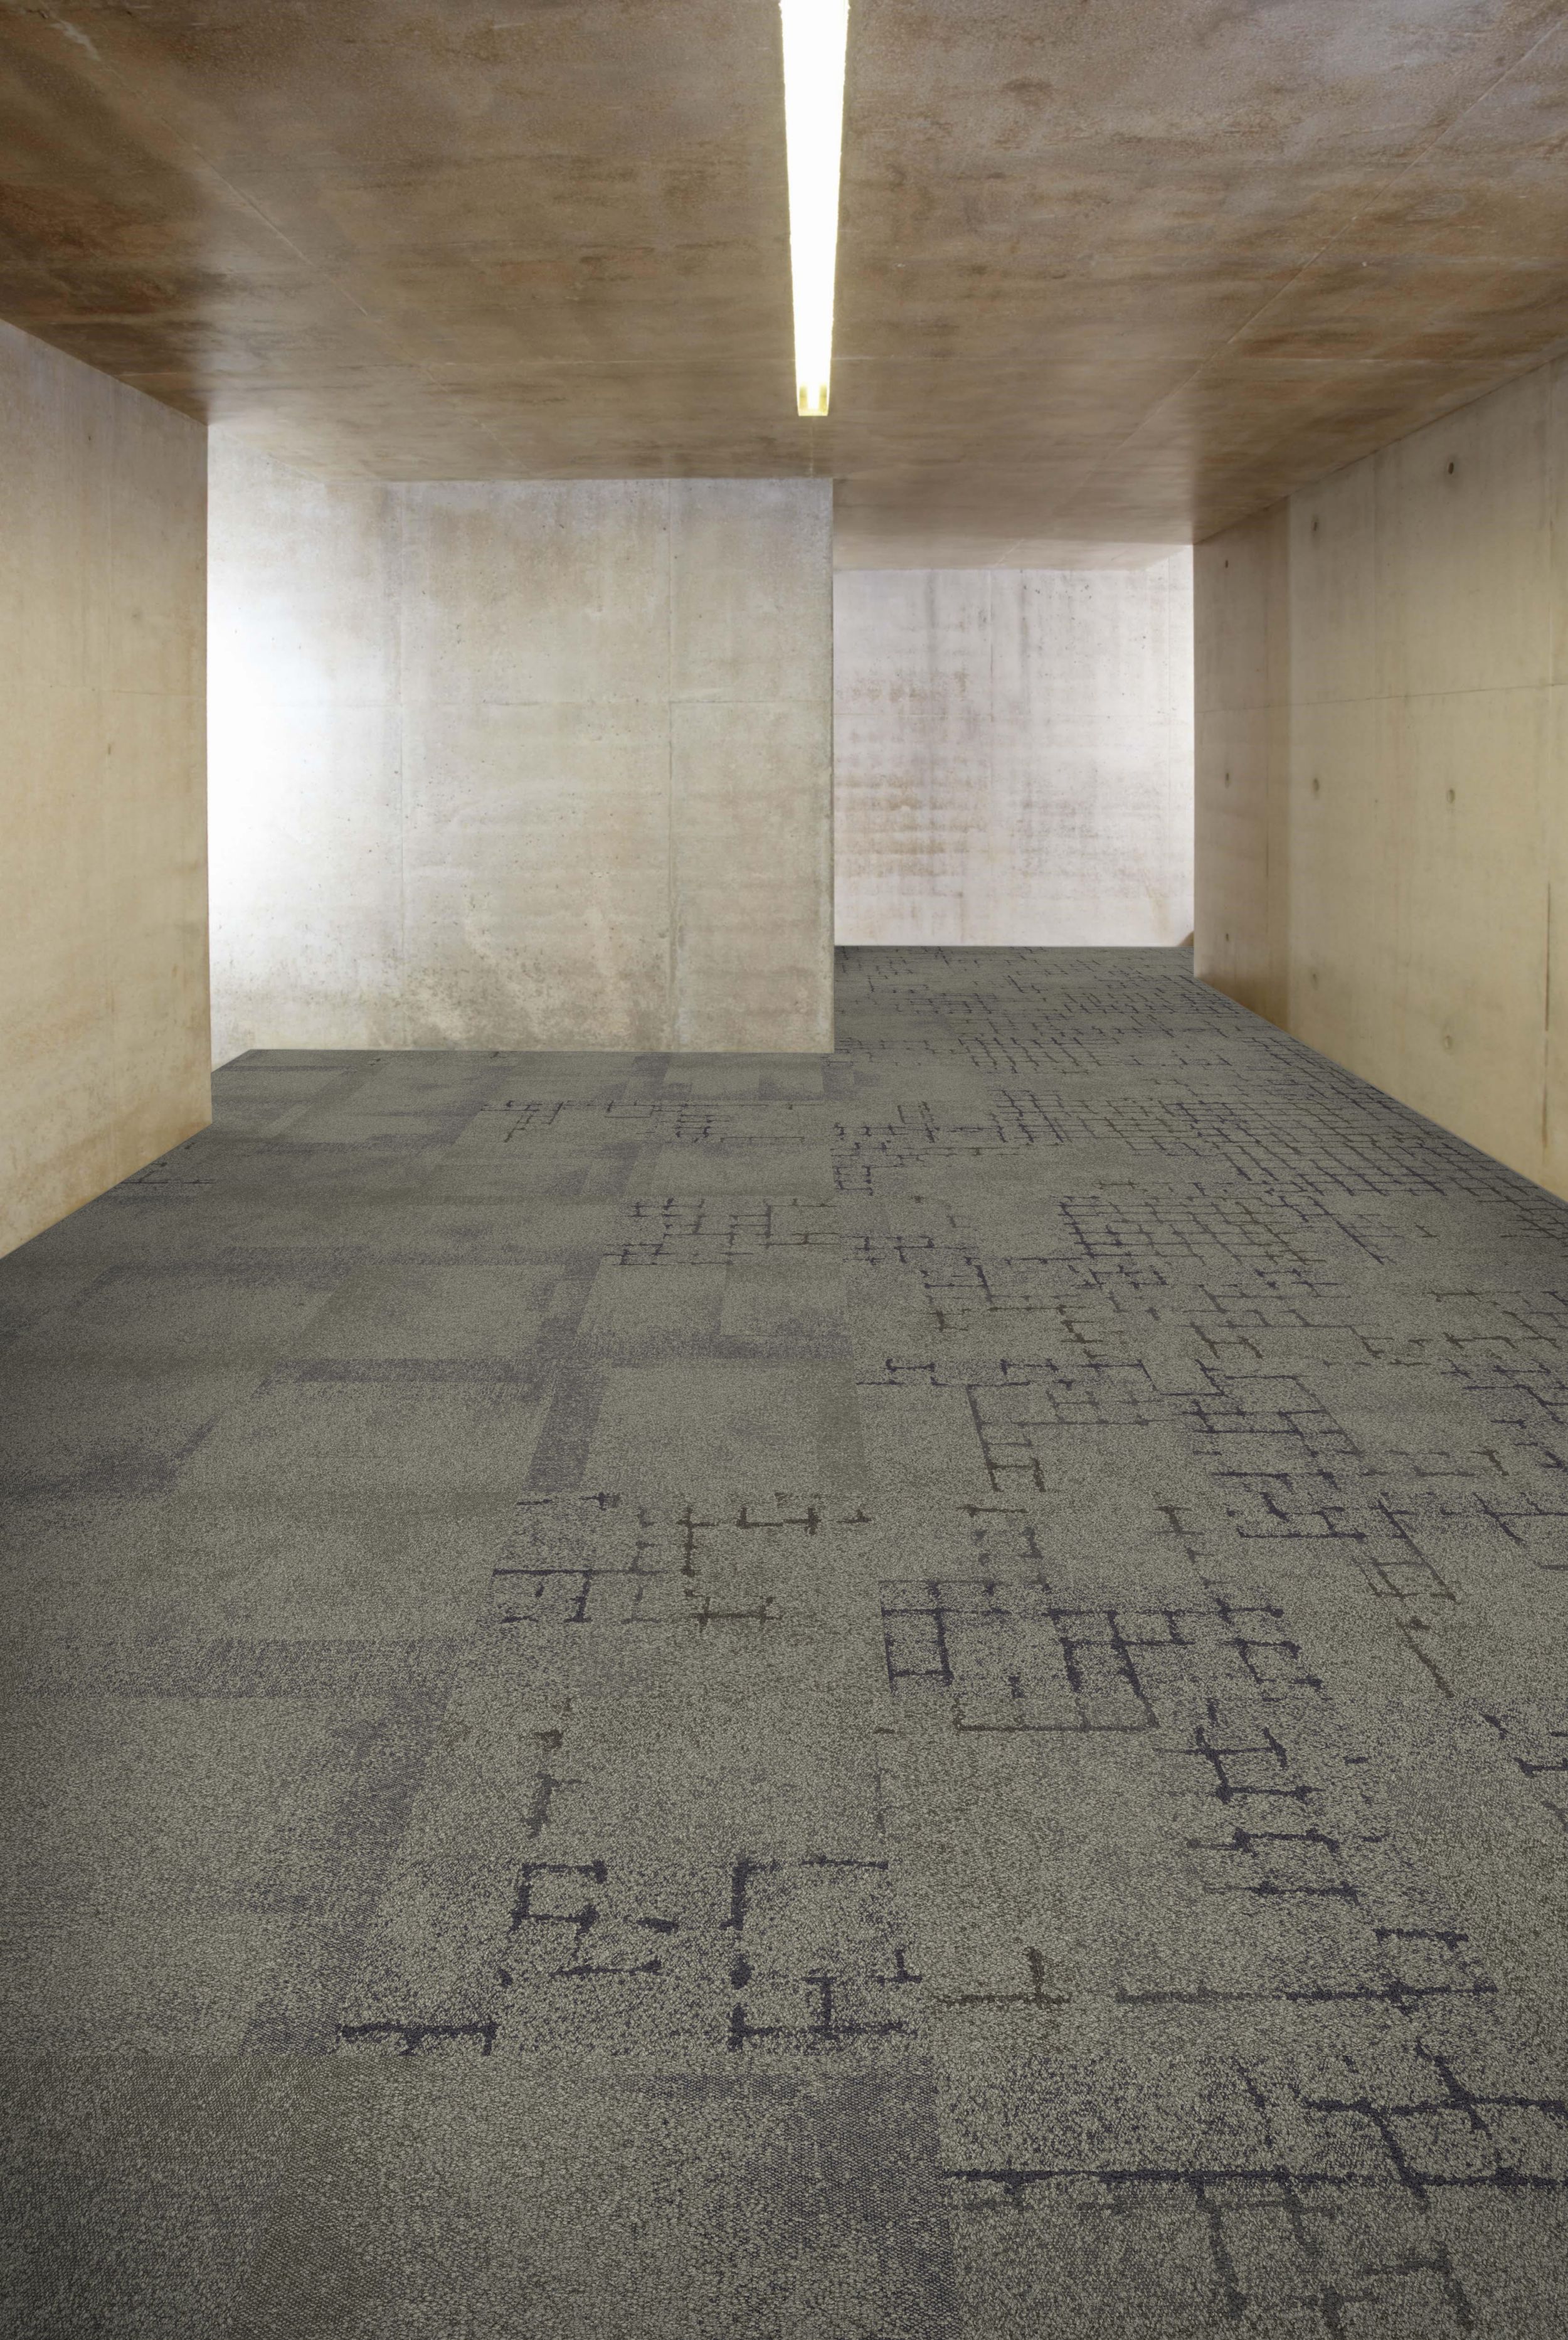 Interface Flagstone, Kerbstone and Sett in Stone carpet tile in corridor with concrete walls and ceiling Bildnummer 6